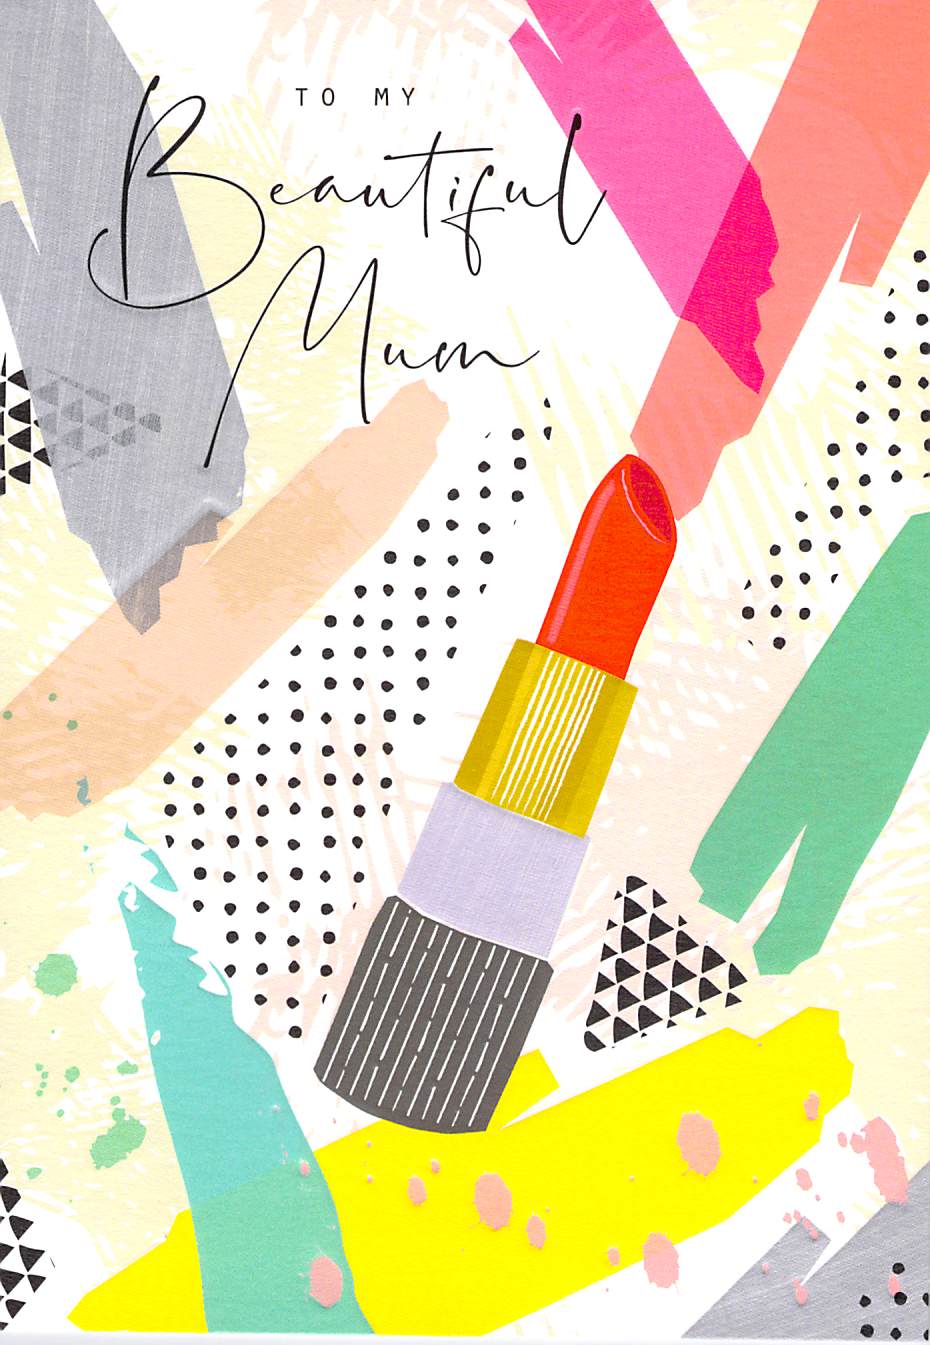 Mothers Day Greeting Card - Mum - Lipstick - Free Postage